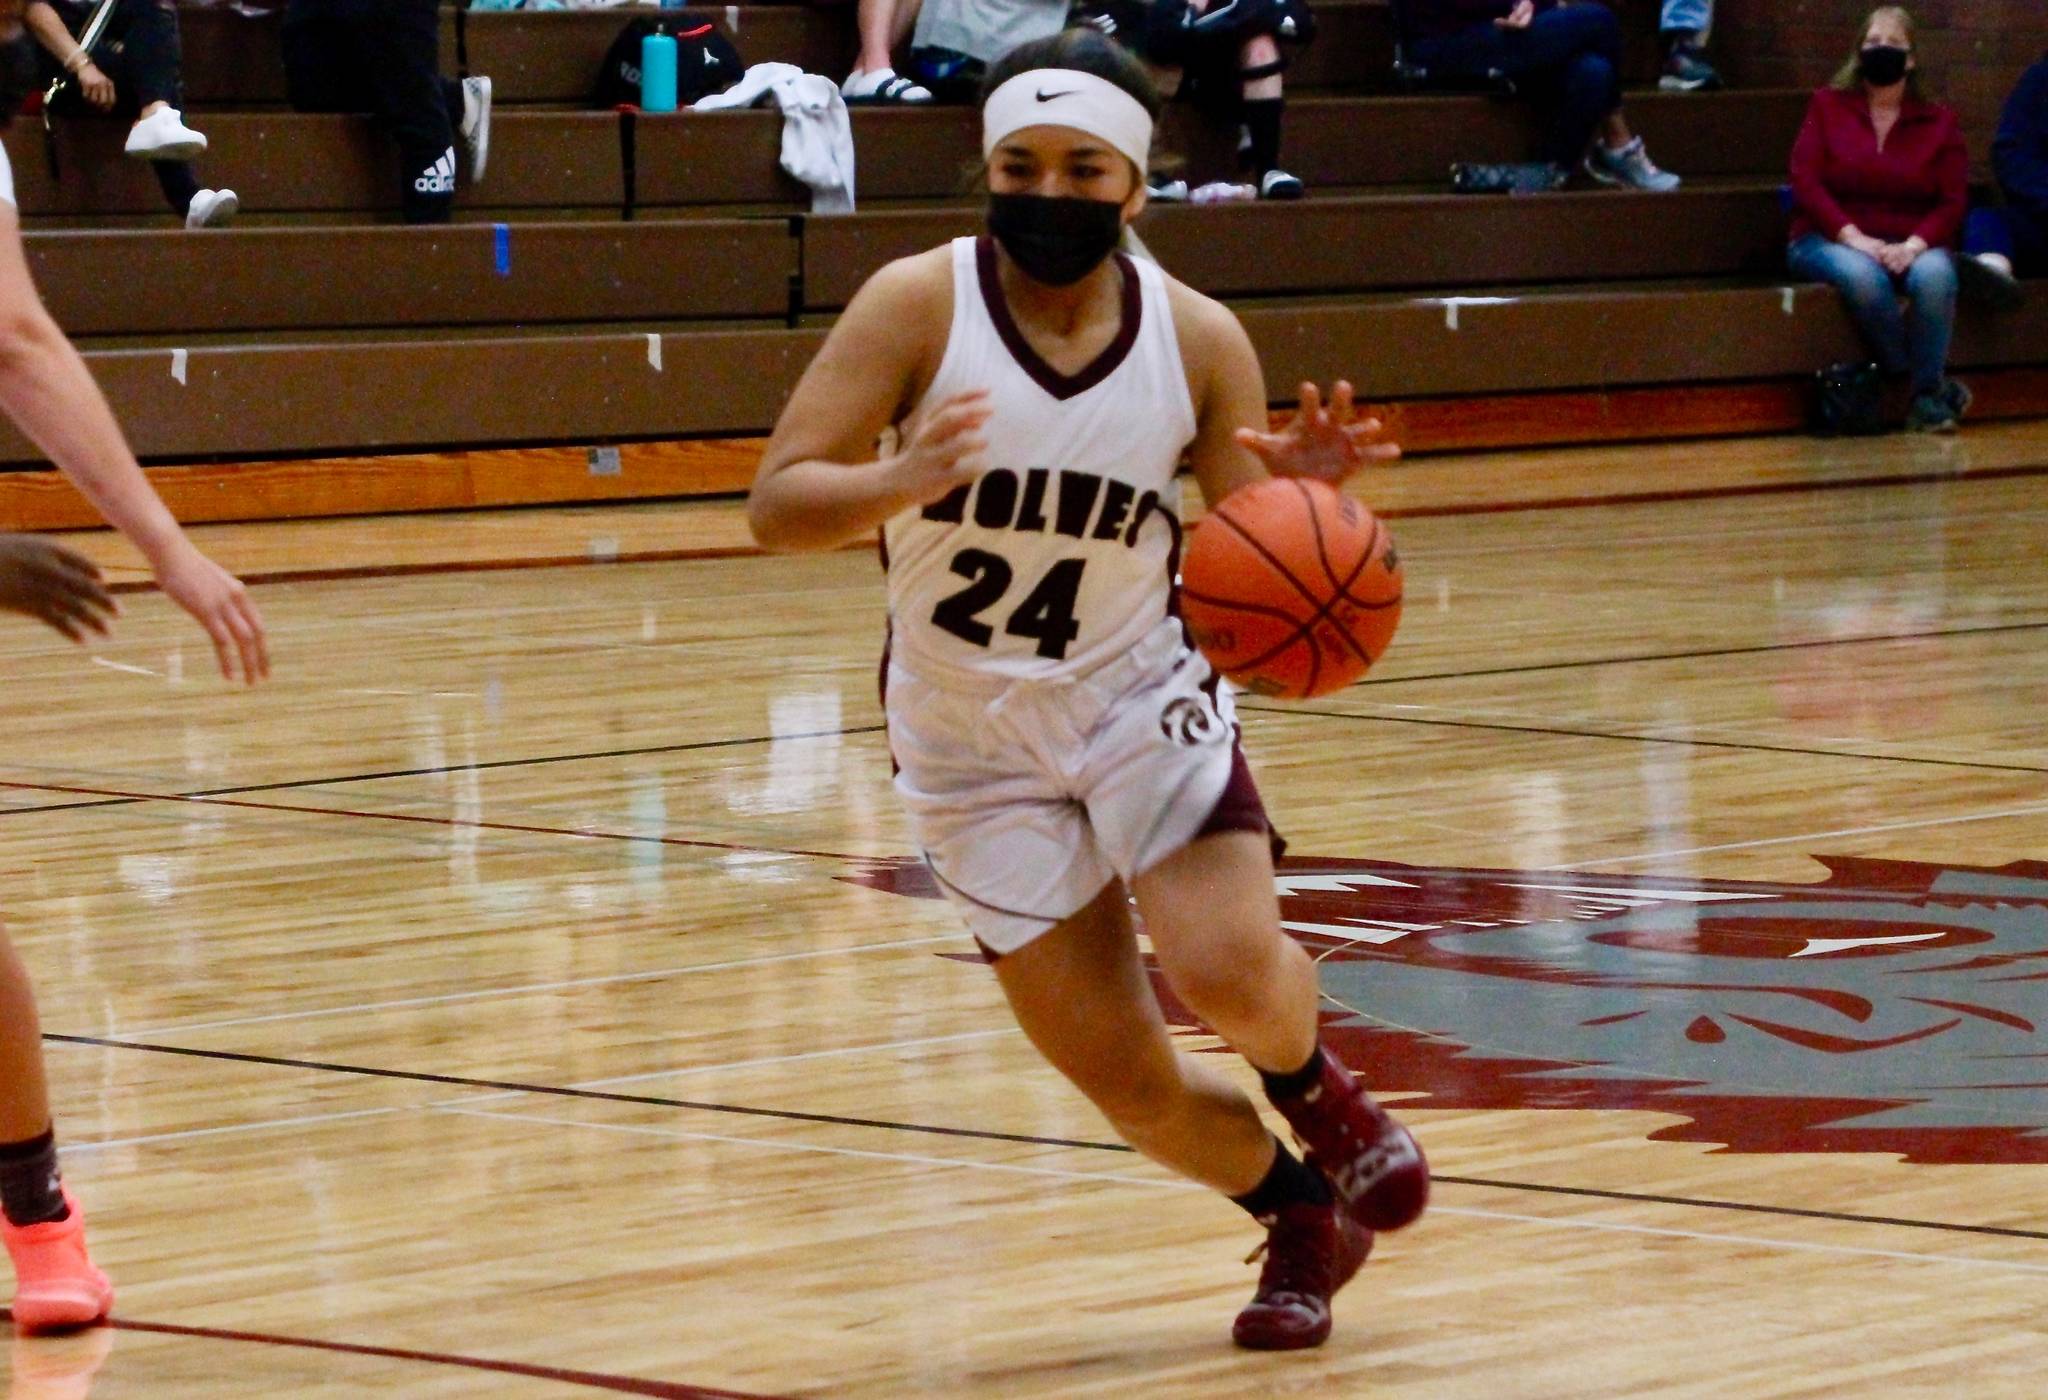 Areeza Amian led South Kitsap with 15 points in her team’s 66-32 win over Central Kitsap. (Mark Krulish/Kitsap News Group)